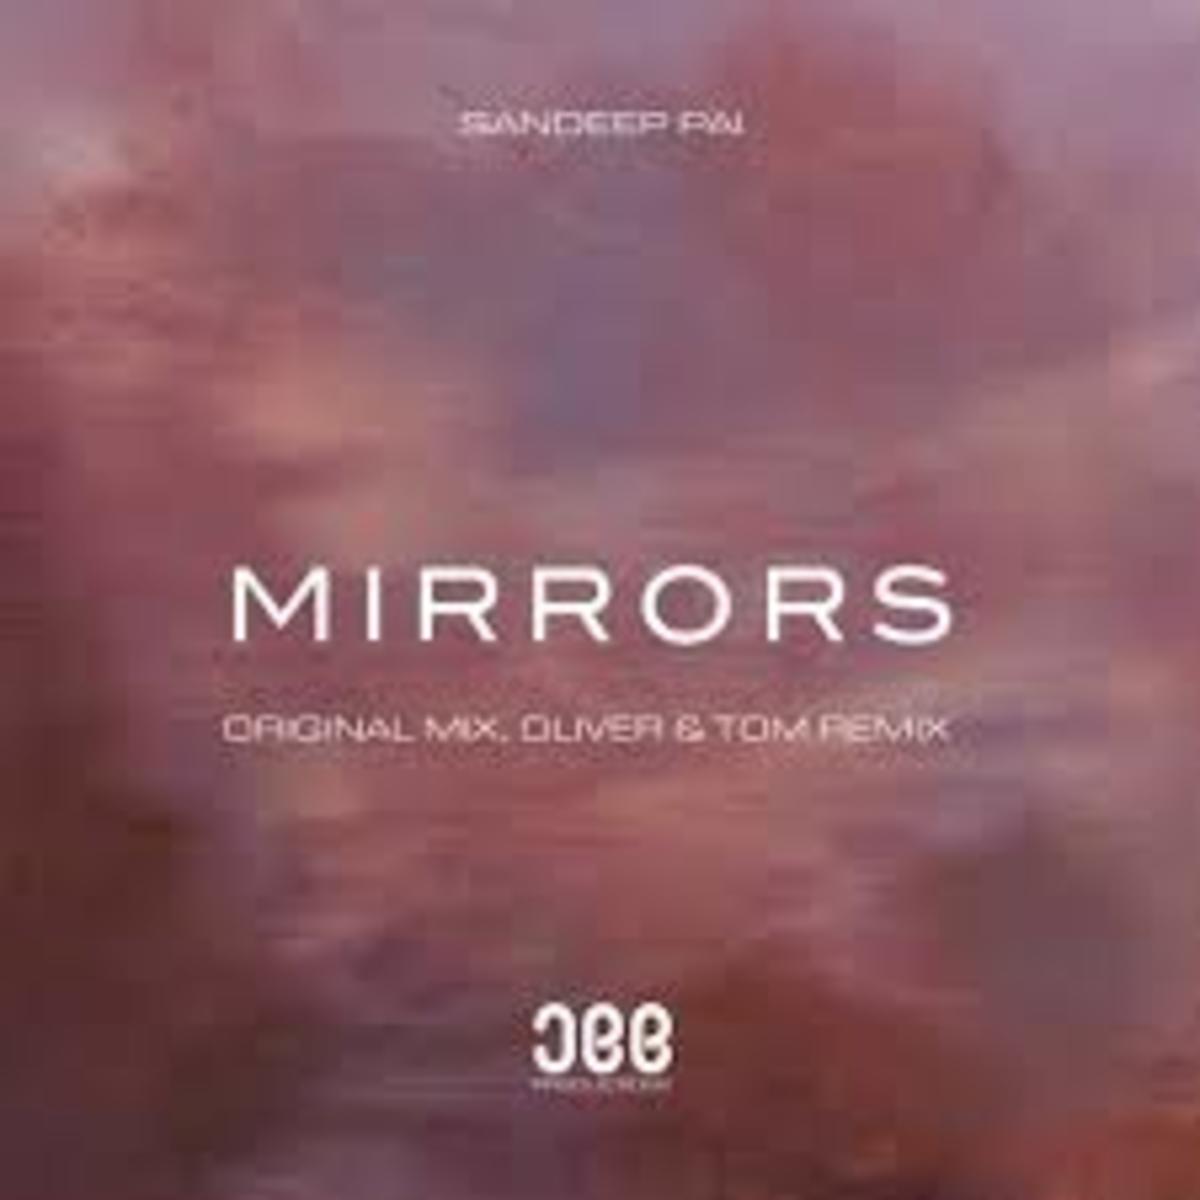 "MIRRORS (OLIVER & TOM REMIX)" - SANDEEP PAI [JEE PRODUCTIONS]